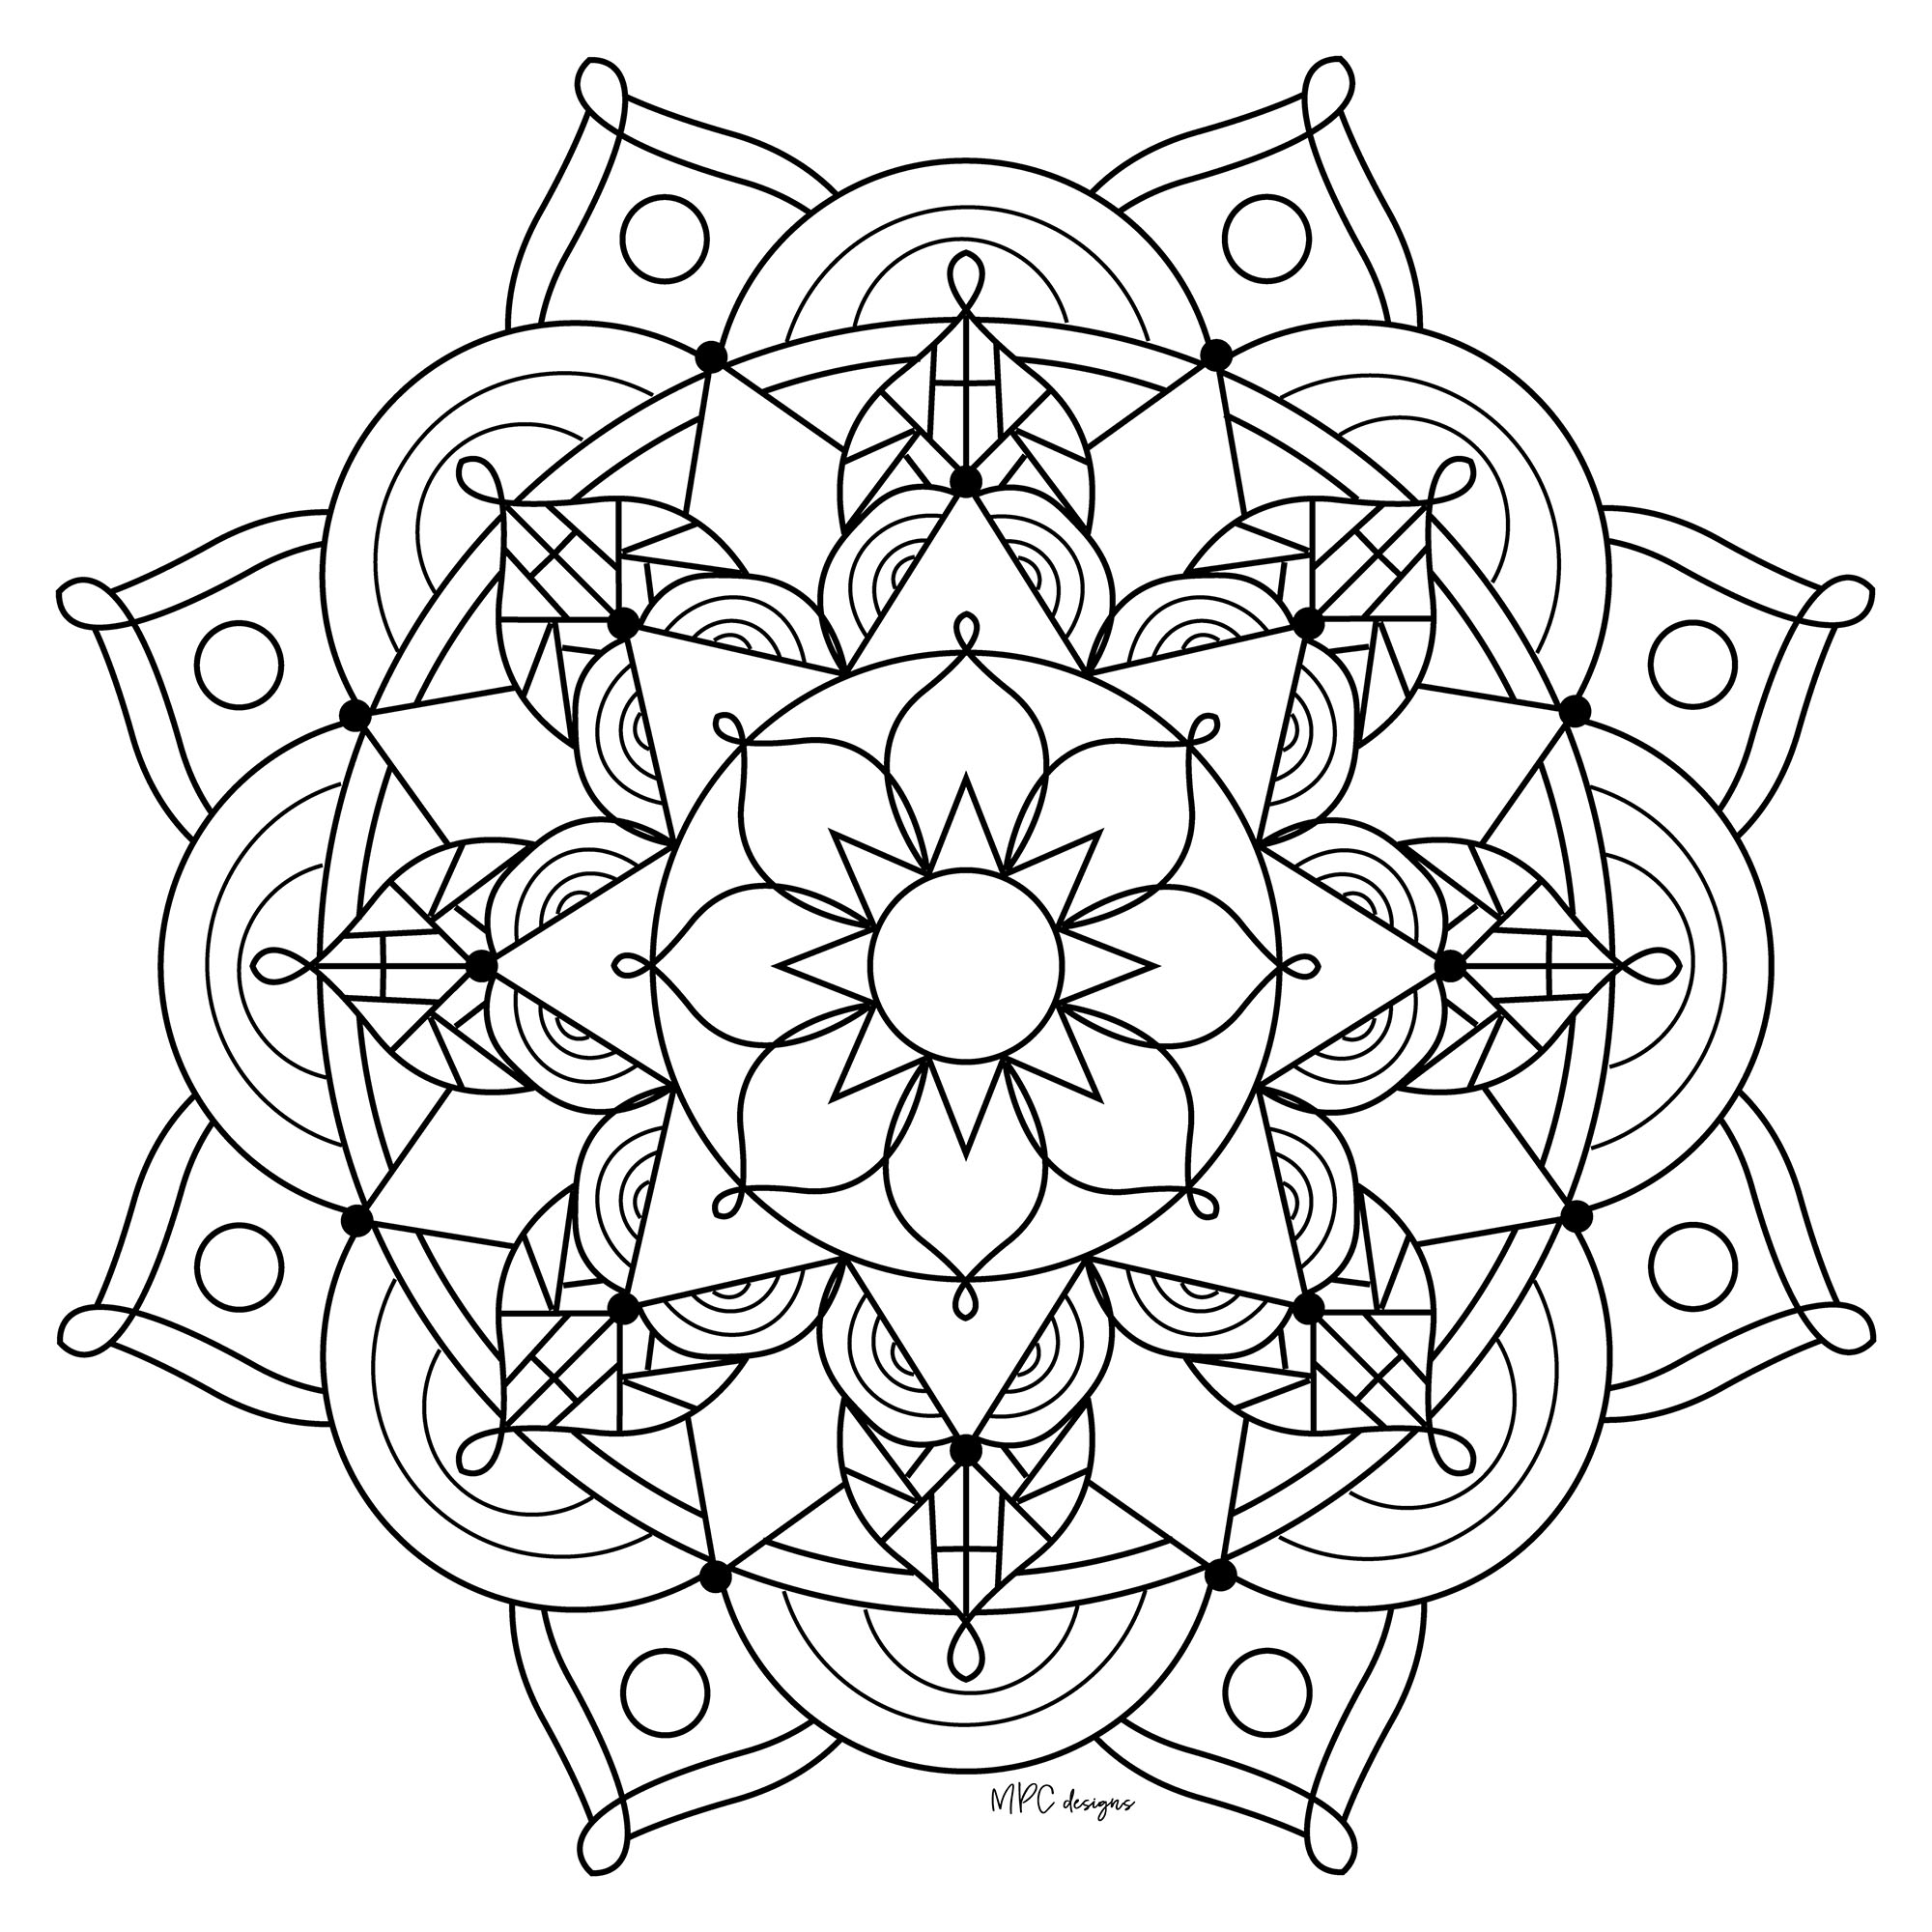 Mandala designs increase self-esteem and stimulate aesthetic sense. Discover it with this beautiful coloring page.